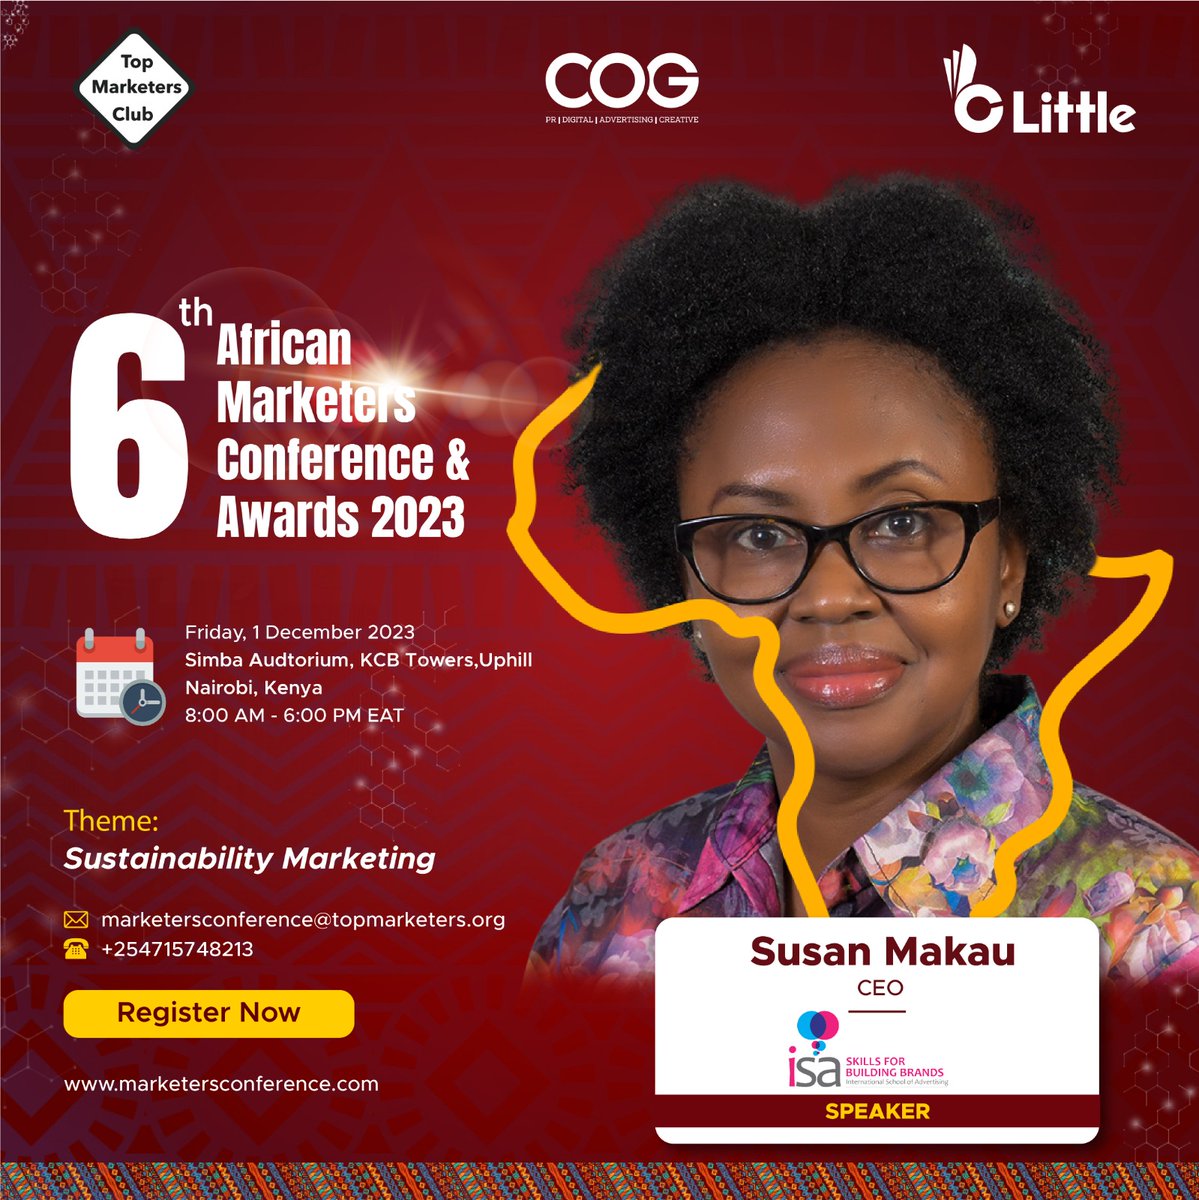 The ultimate marketing conference and awards ceremony is going down this Friday.  Honoured to have our C. Founder, Susan Makau MCIM speak at the event. Don't forget to pass by the ISA booth to win some goodies.

#marketingevent #awards2023 @TopMarketers1